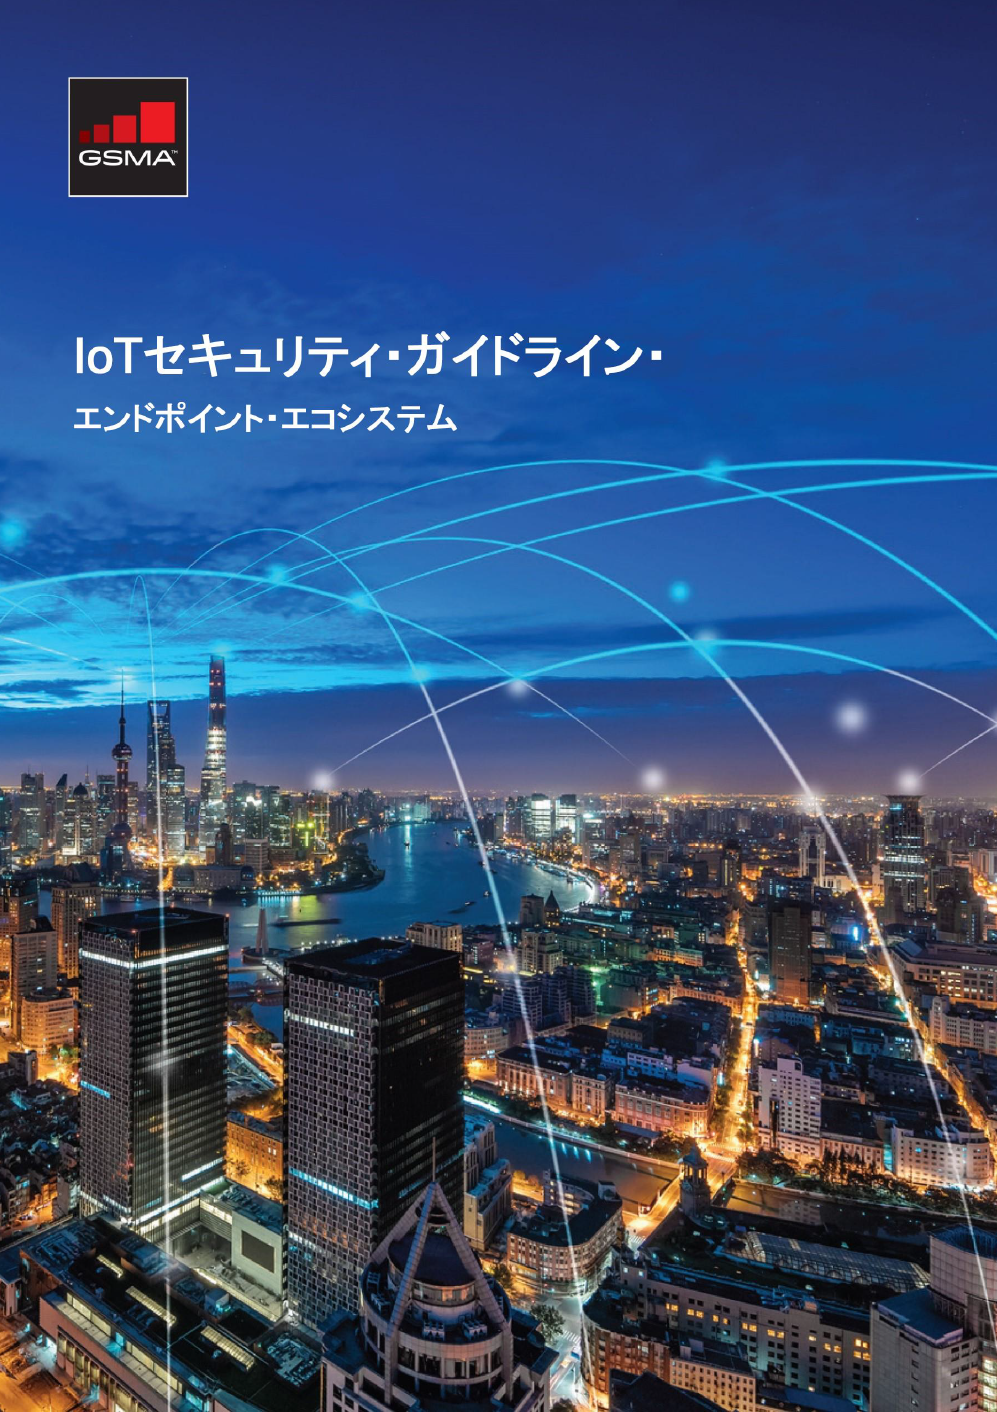 GSMA IoT Security Guidelines and Assessment – Japanese image